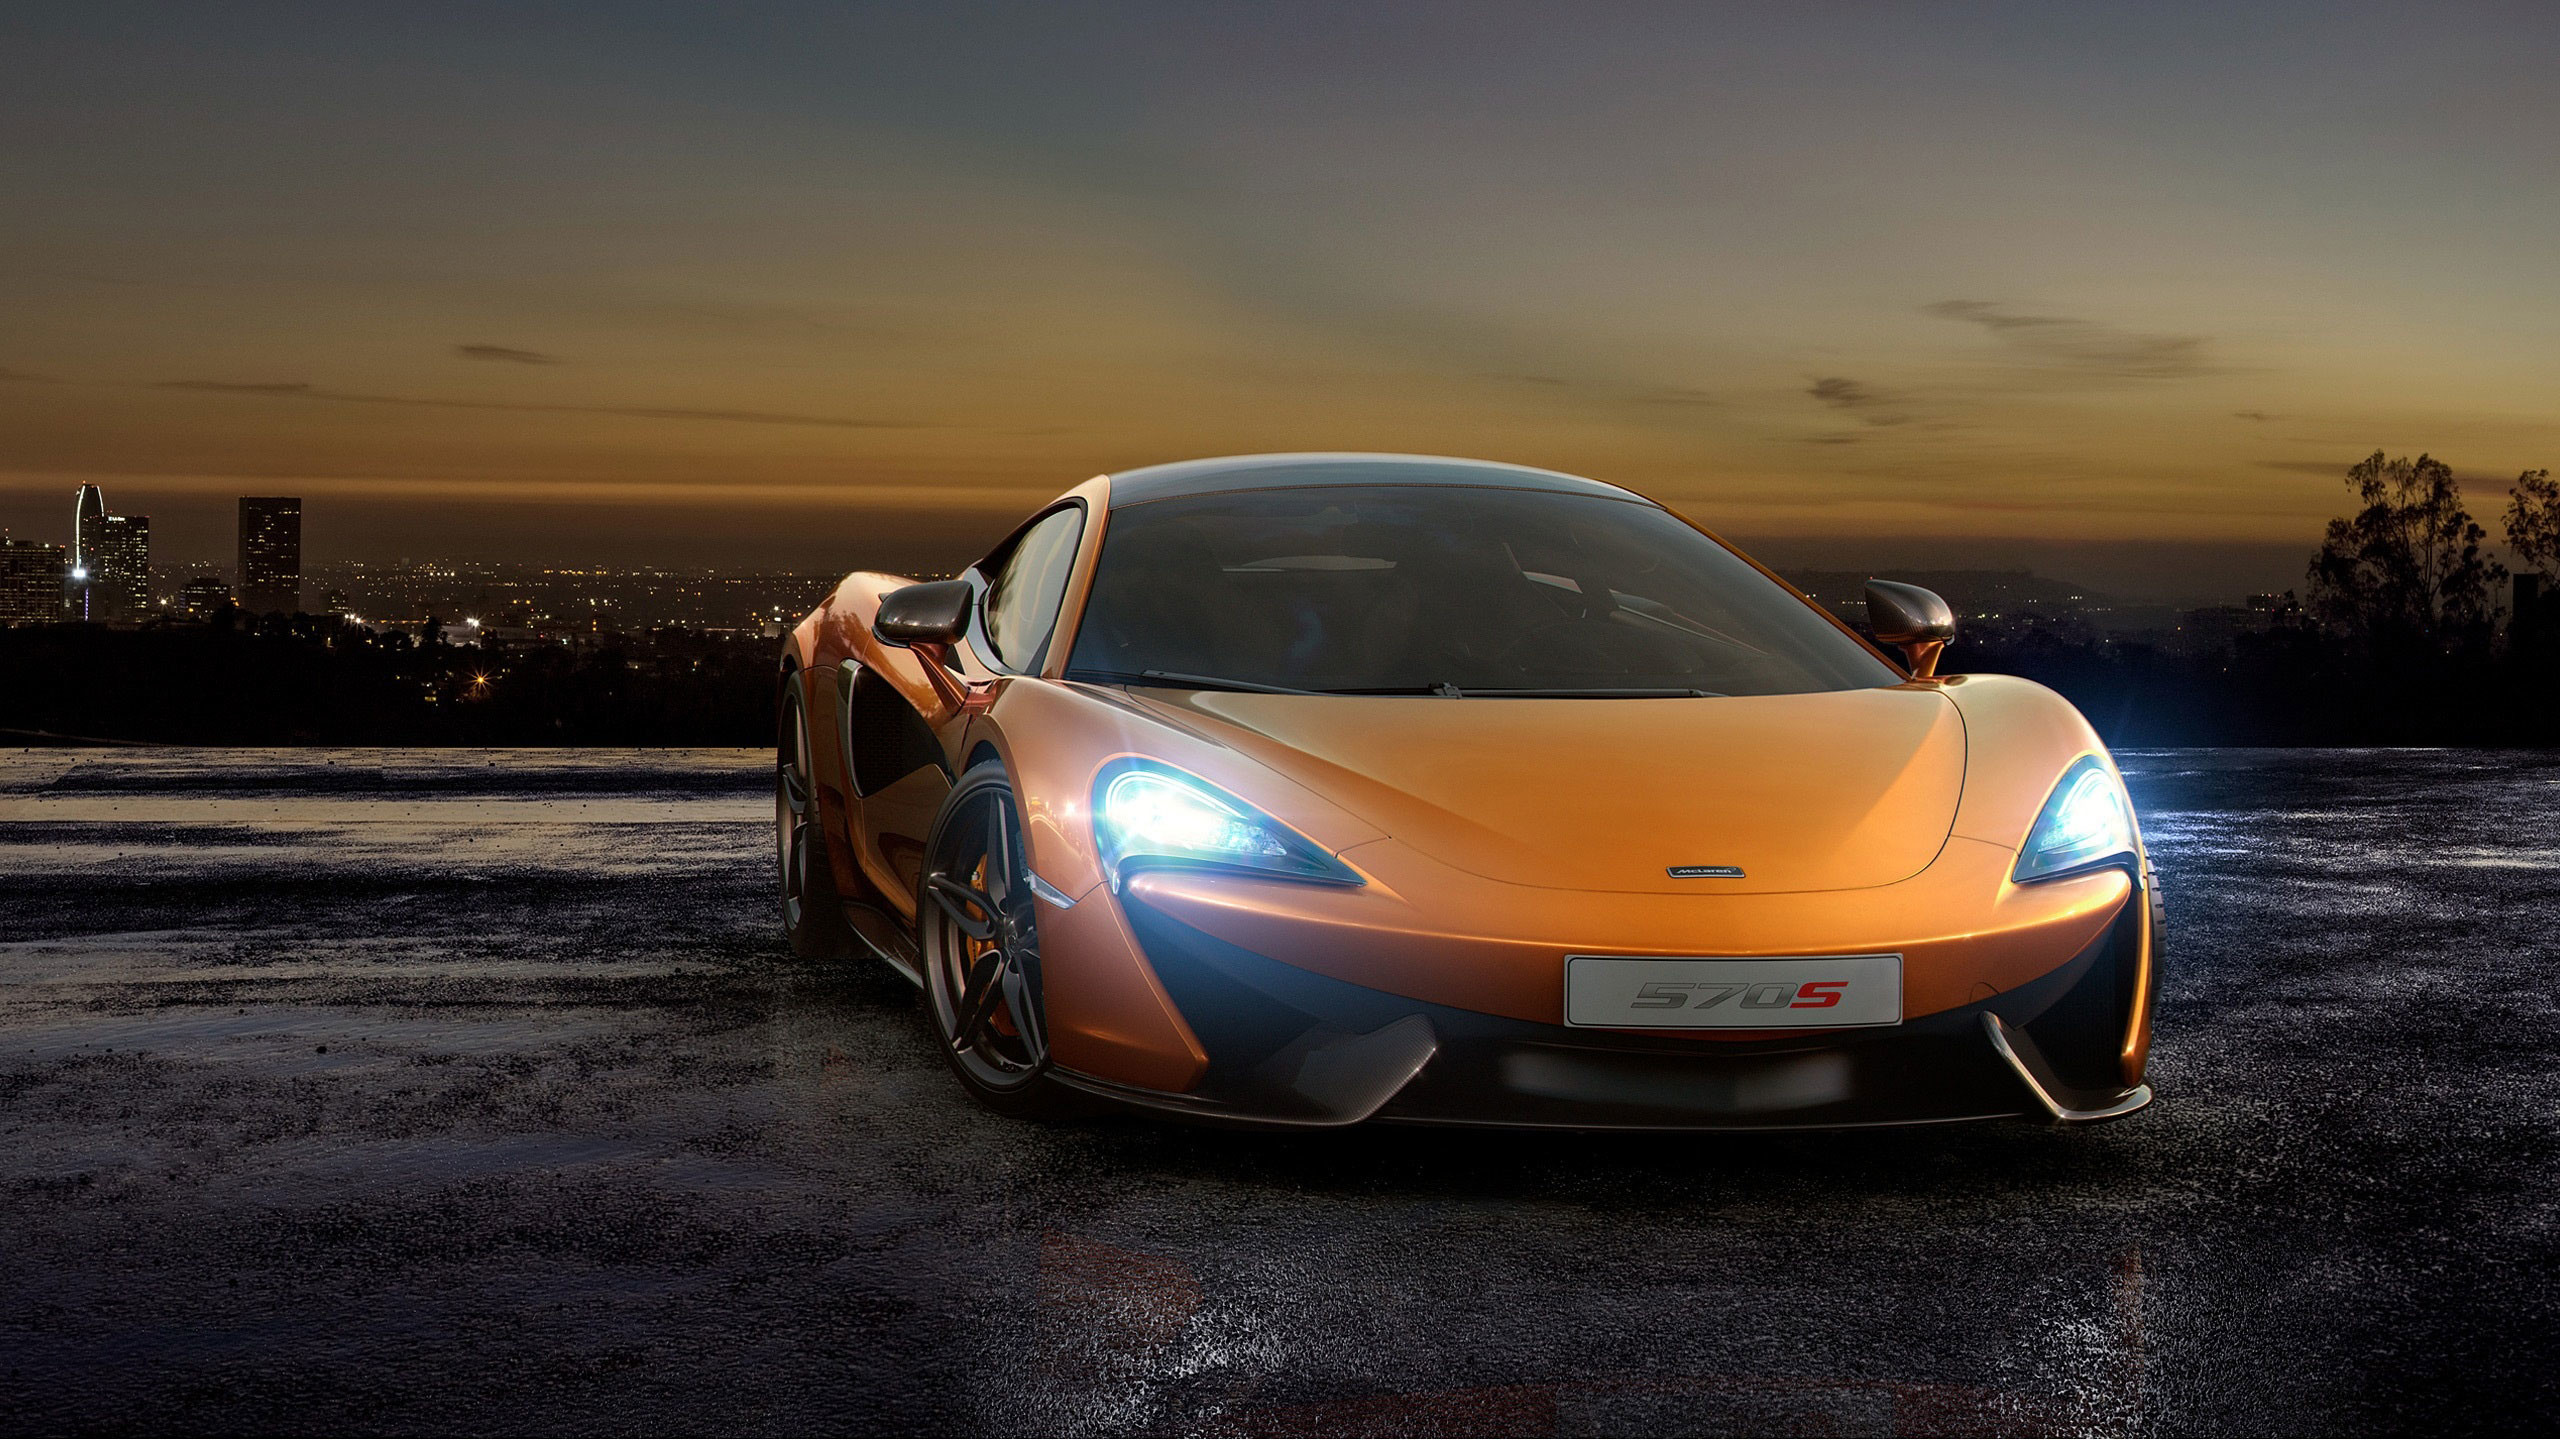 2560x1440 Car Hd Wallpapers Awesome Car Backgrounds